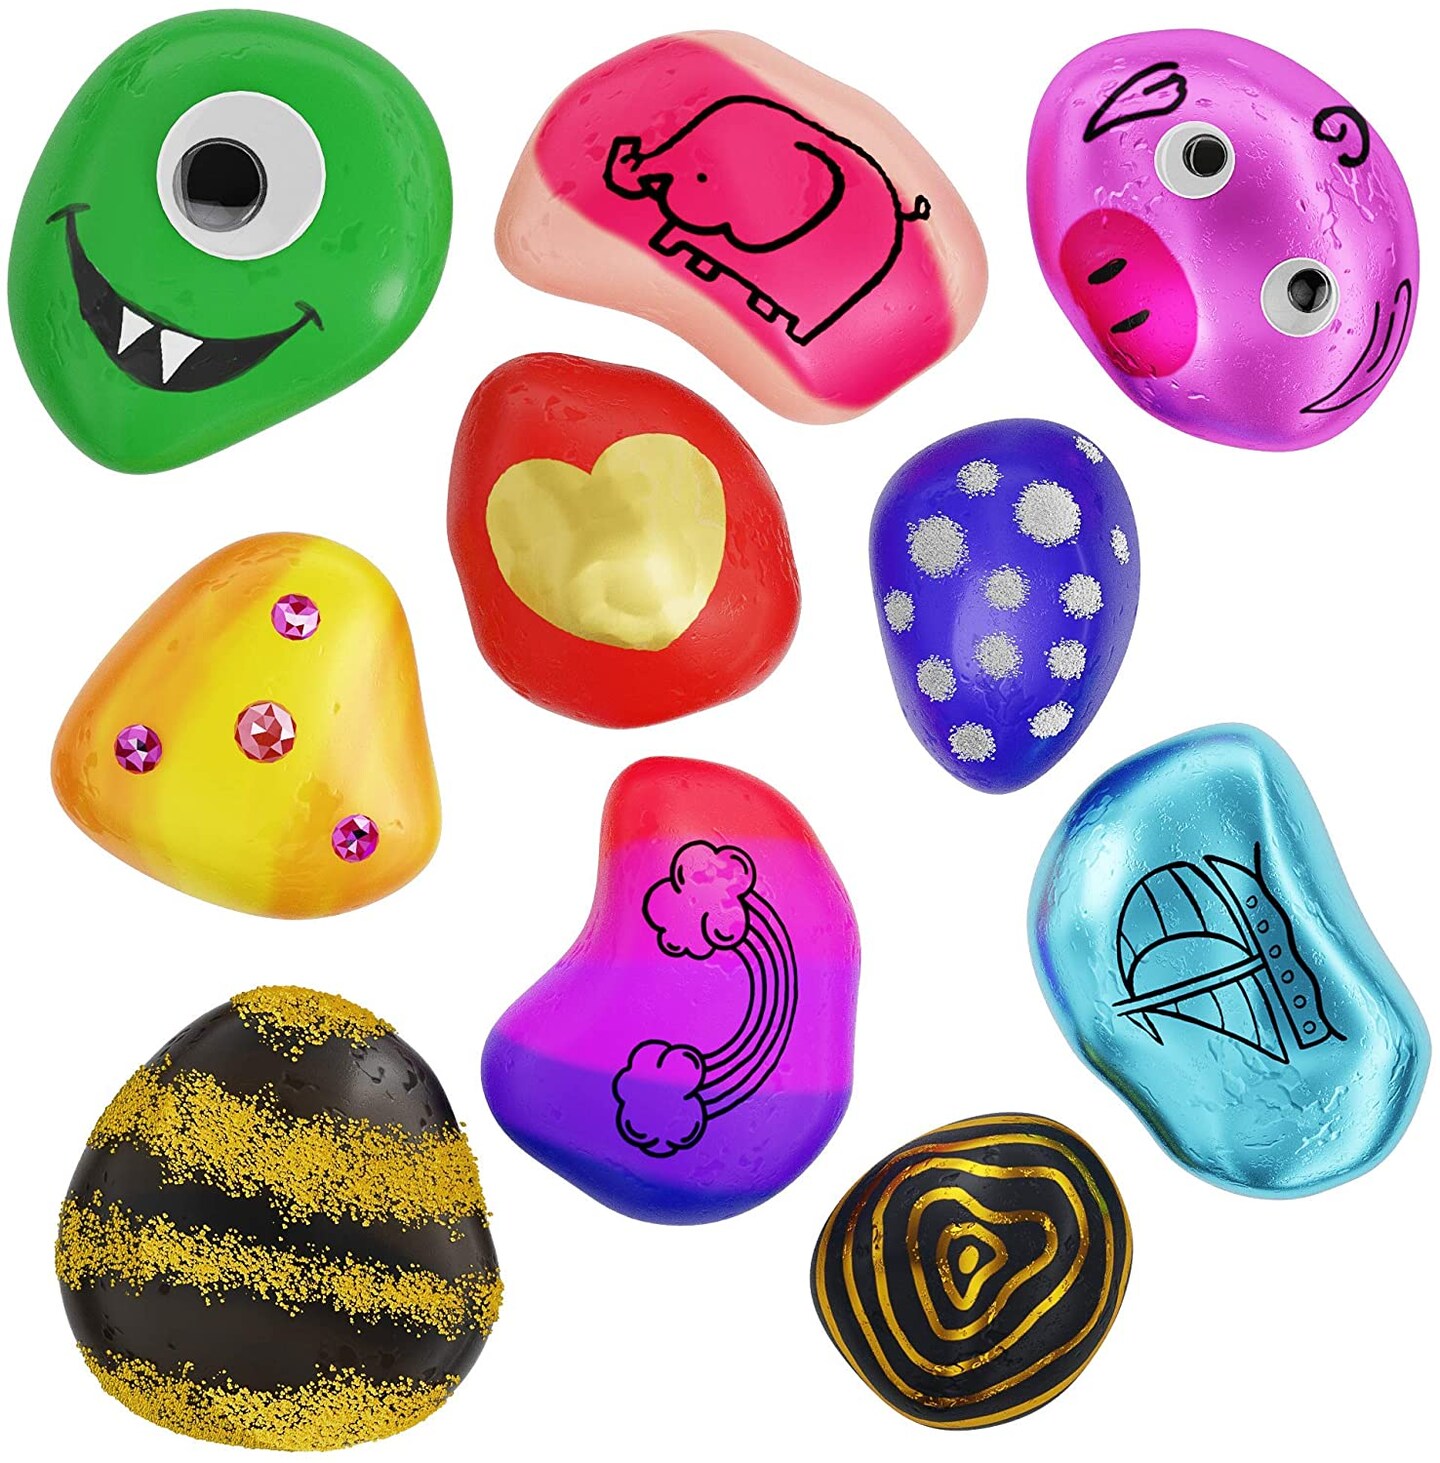 Rock Painting Kit for Kids  Arts & Craft Kits for Girls & Boys